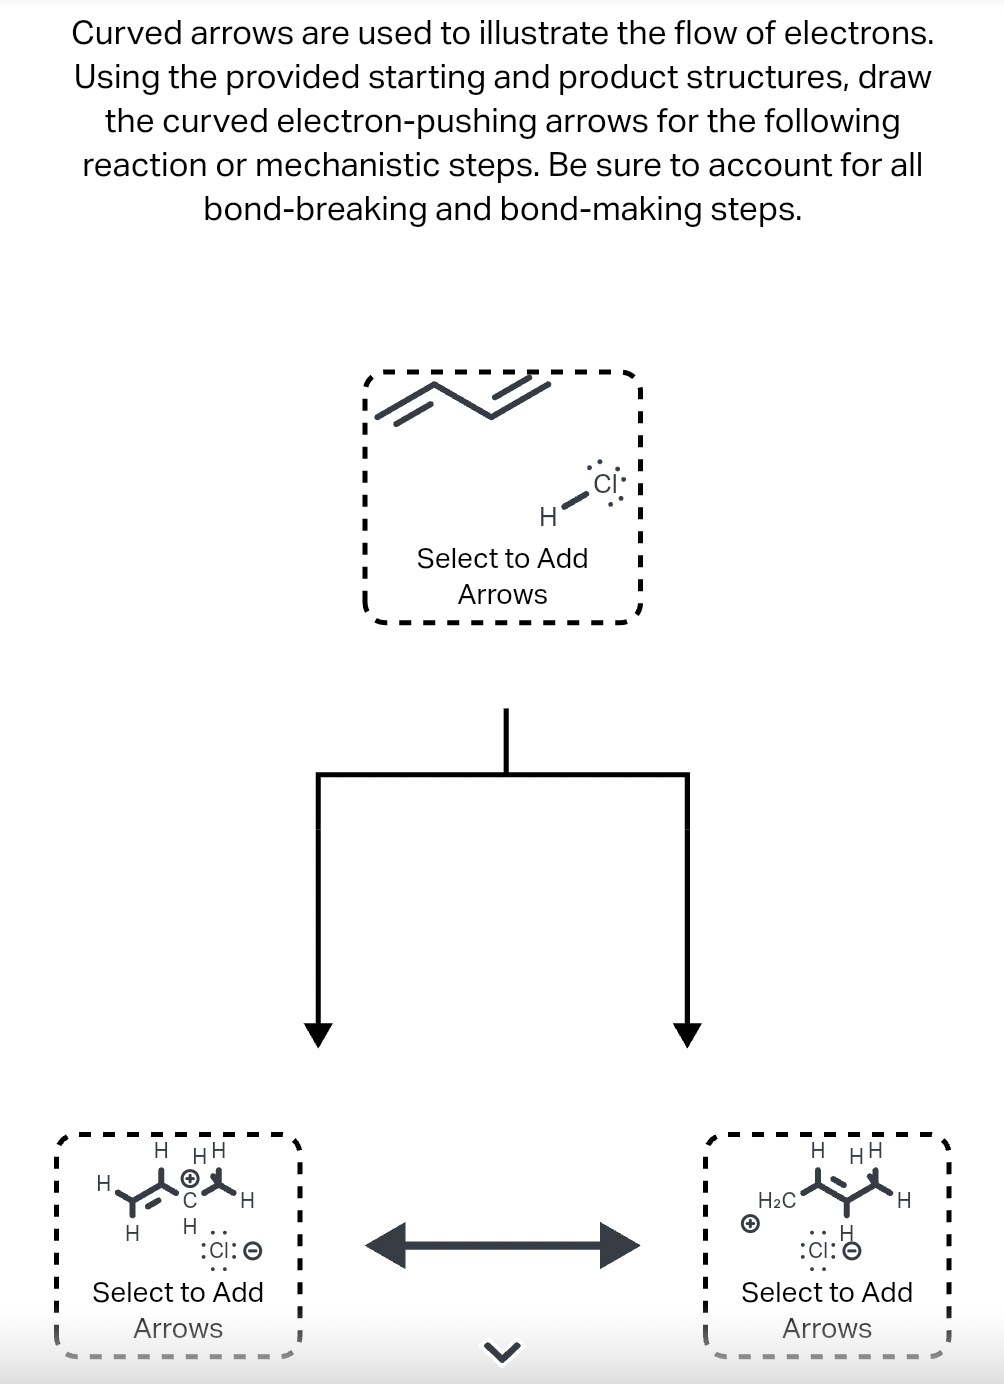 Curved arrows are used to illustrate the flow of electrons.
Using the provided starting and product structures, draw
the curved electron-pushing arrows for the following
reaction or mechanistic steps. Be sure to account for all
bond-breaking and bond-making steps.
H
H
HH H
H
H
:CI: O
Select to Add
Arrows
H
Select to Add
Arrows
>
I
H₂C
H HH
H
:ci:
Select to Add
Arrows
I
I